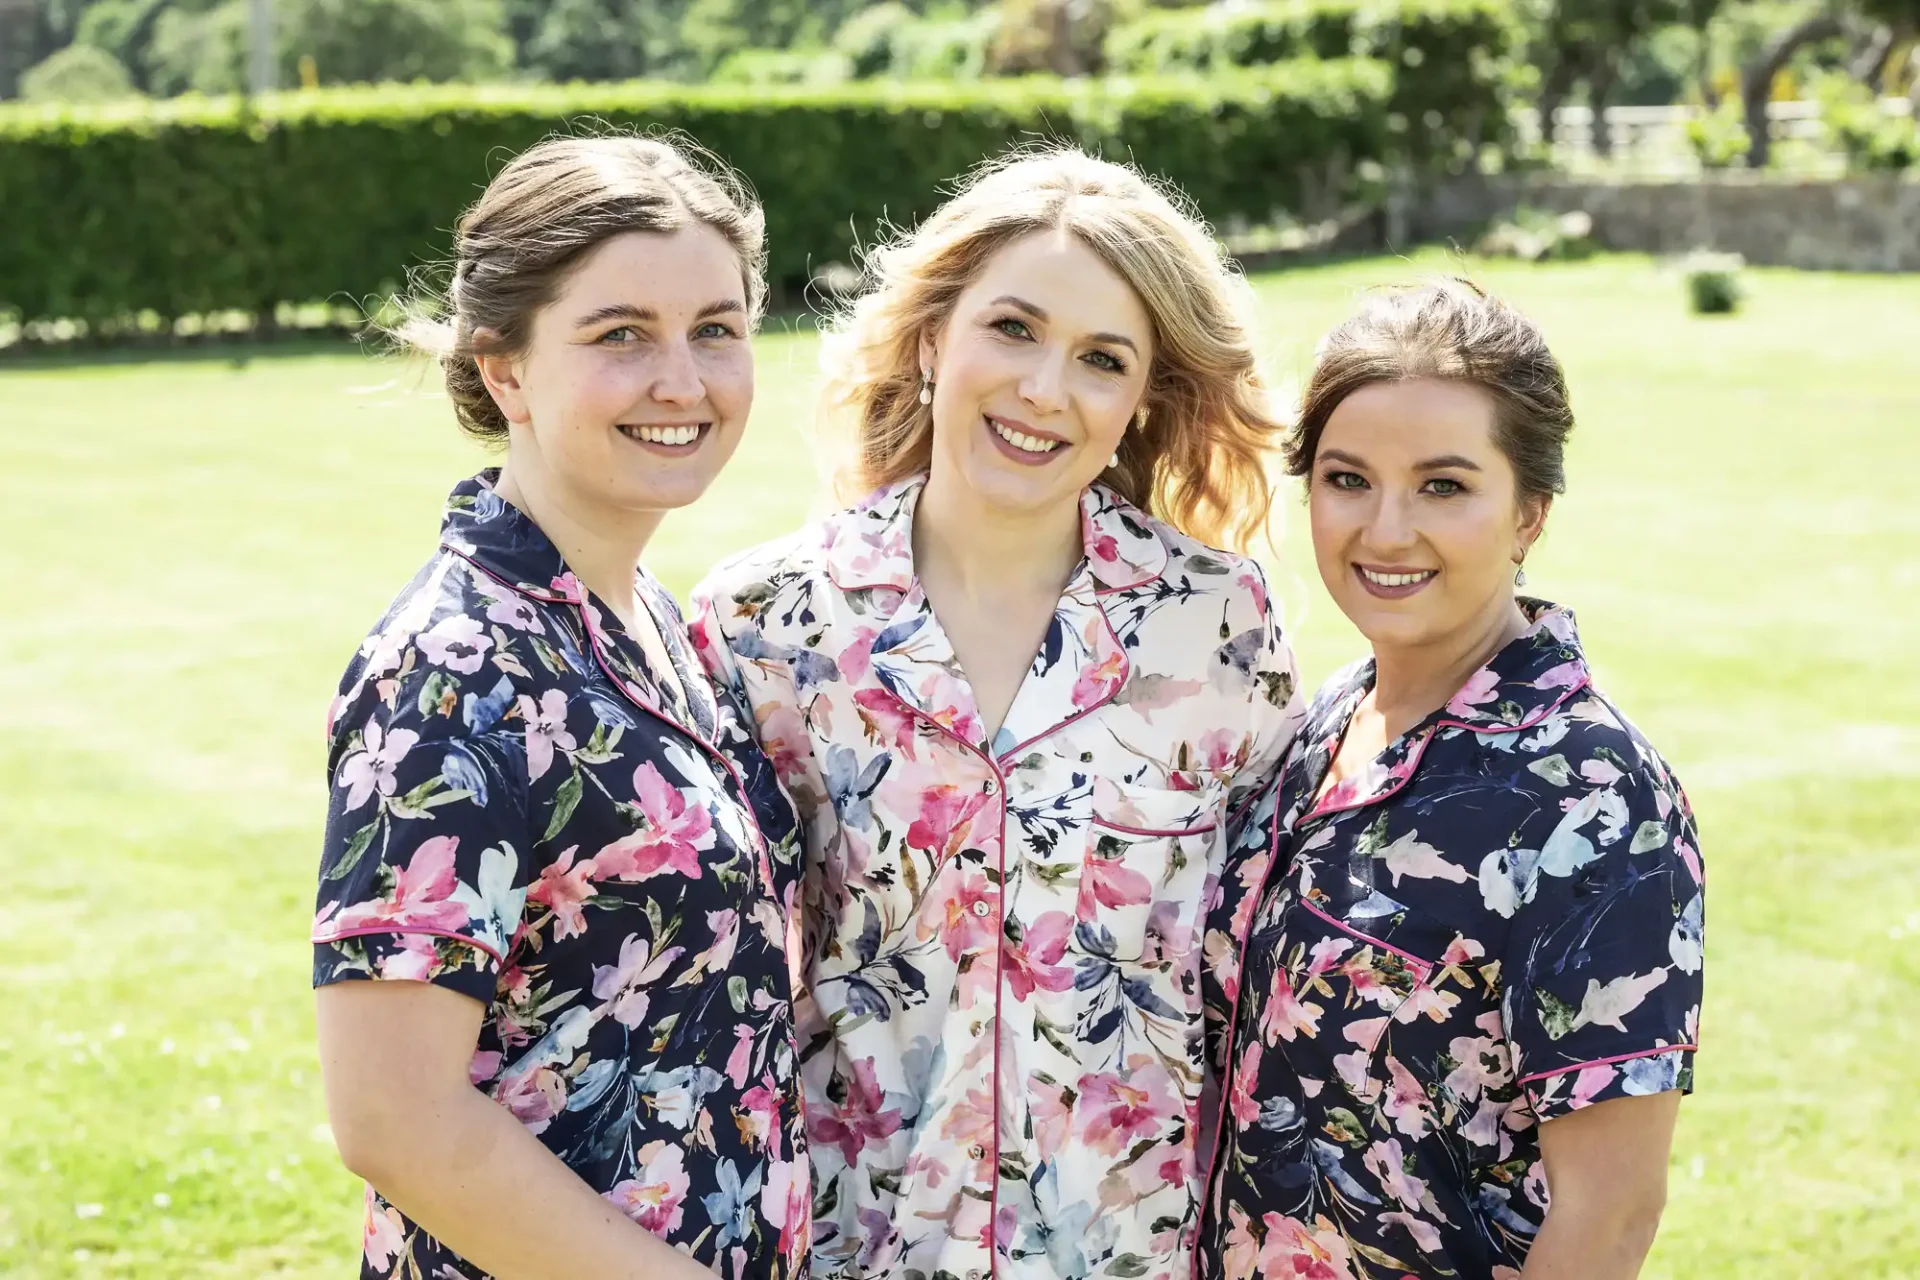 Three women in floral dresses smiling outdoors on a sunny day.